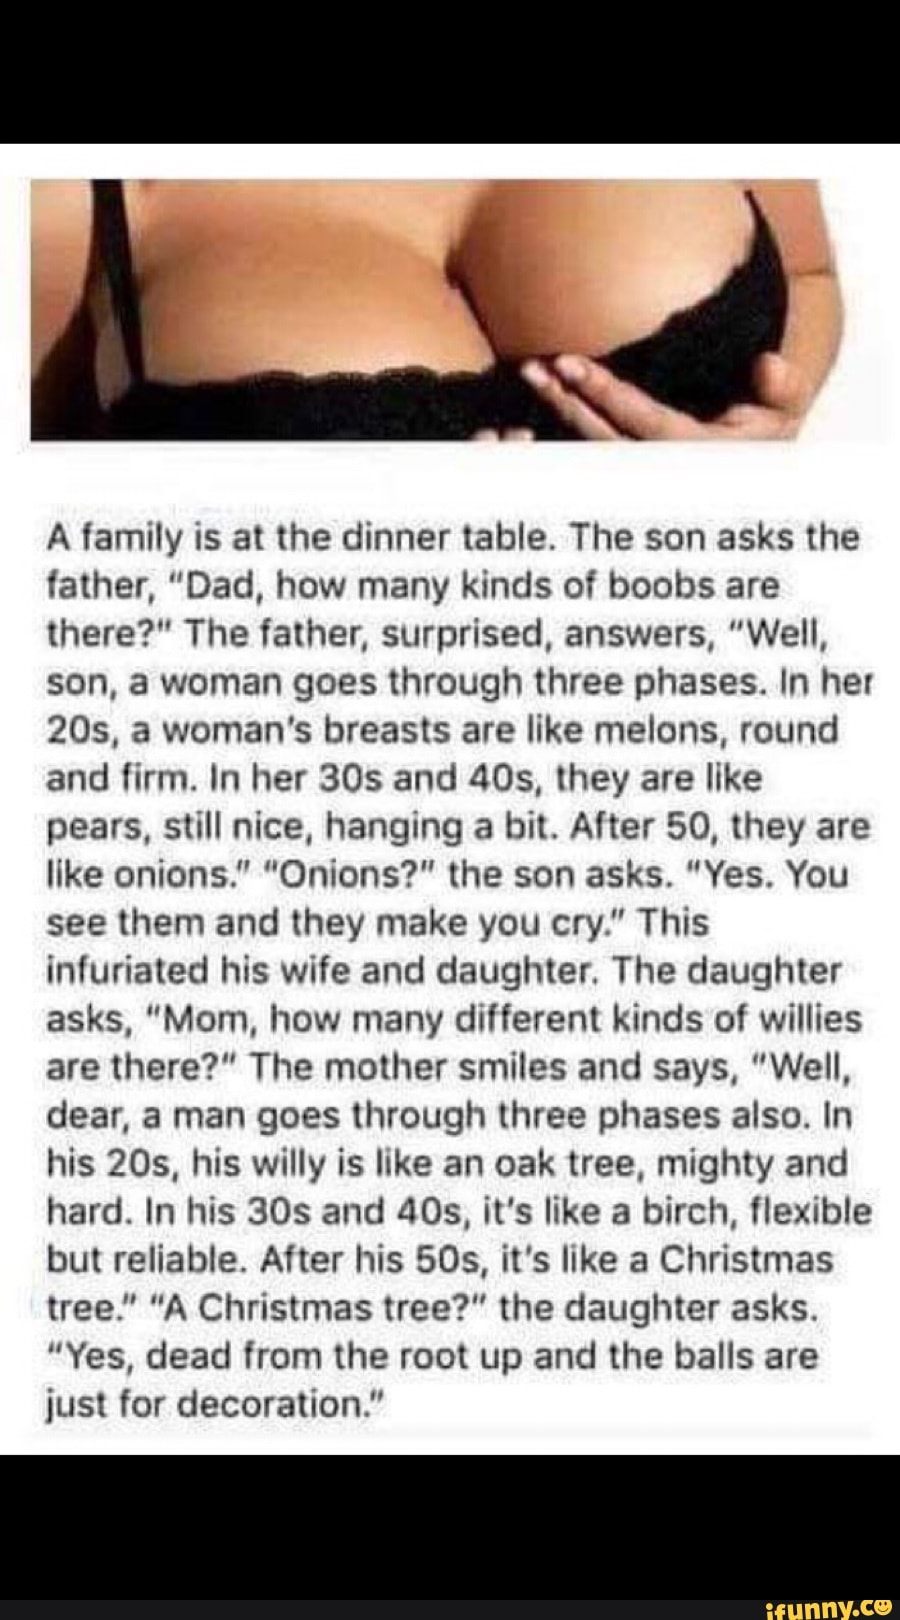 A family is at the dinner table. The son asks the father, “Dad